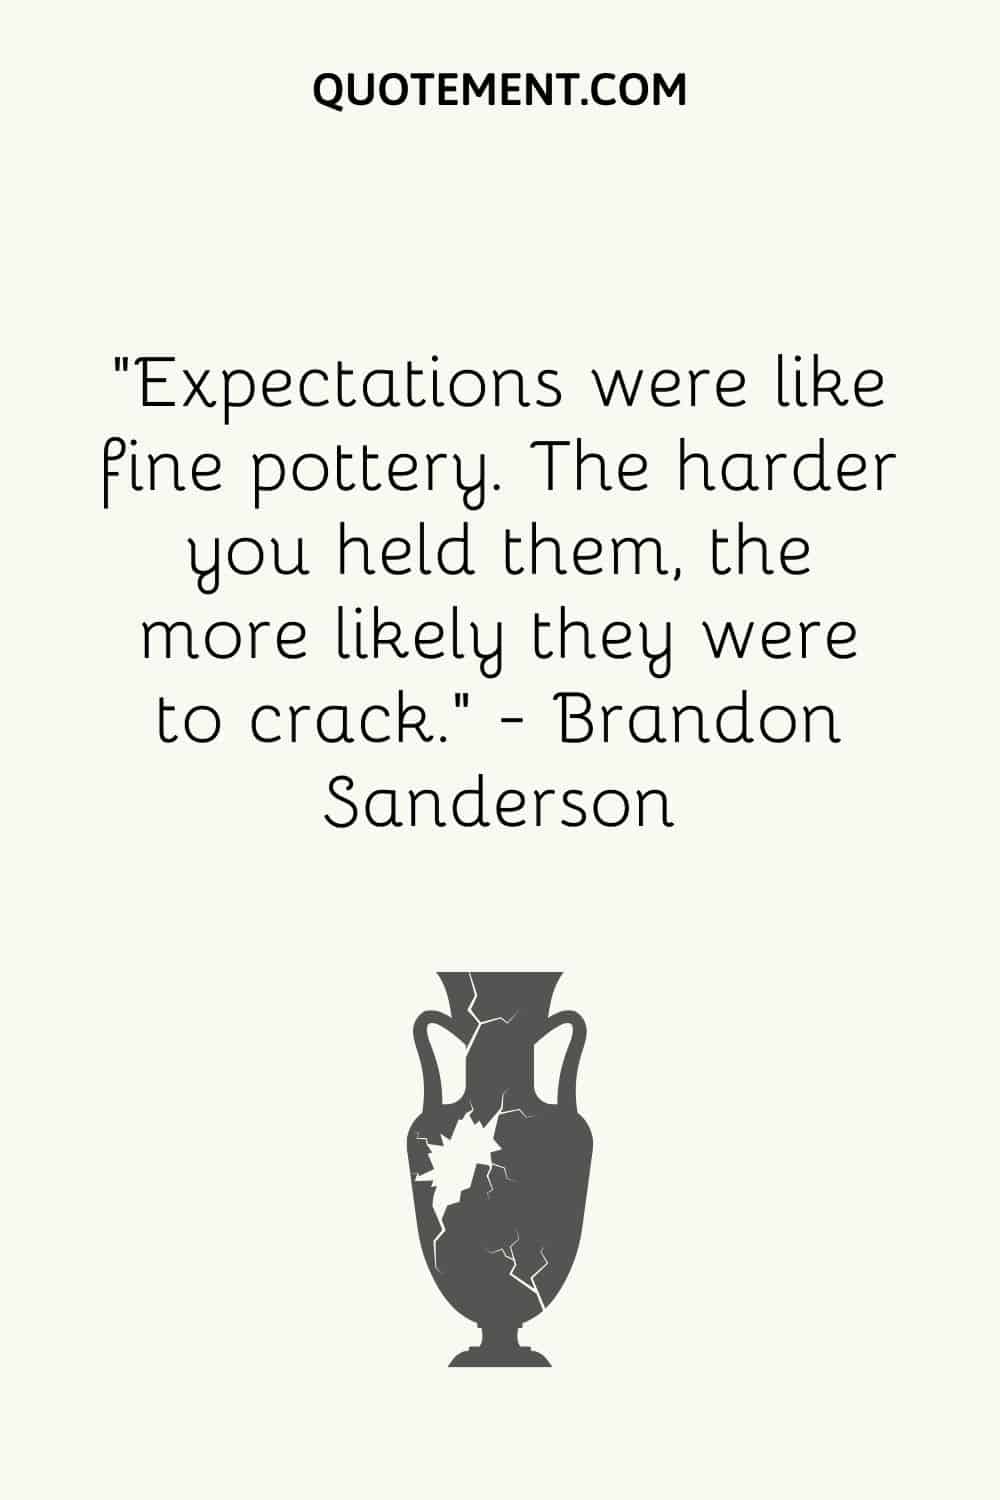 Expectations were like fine pottery